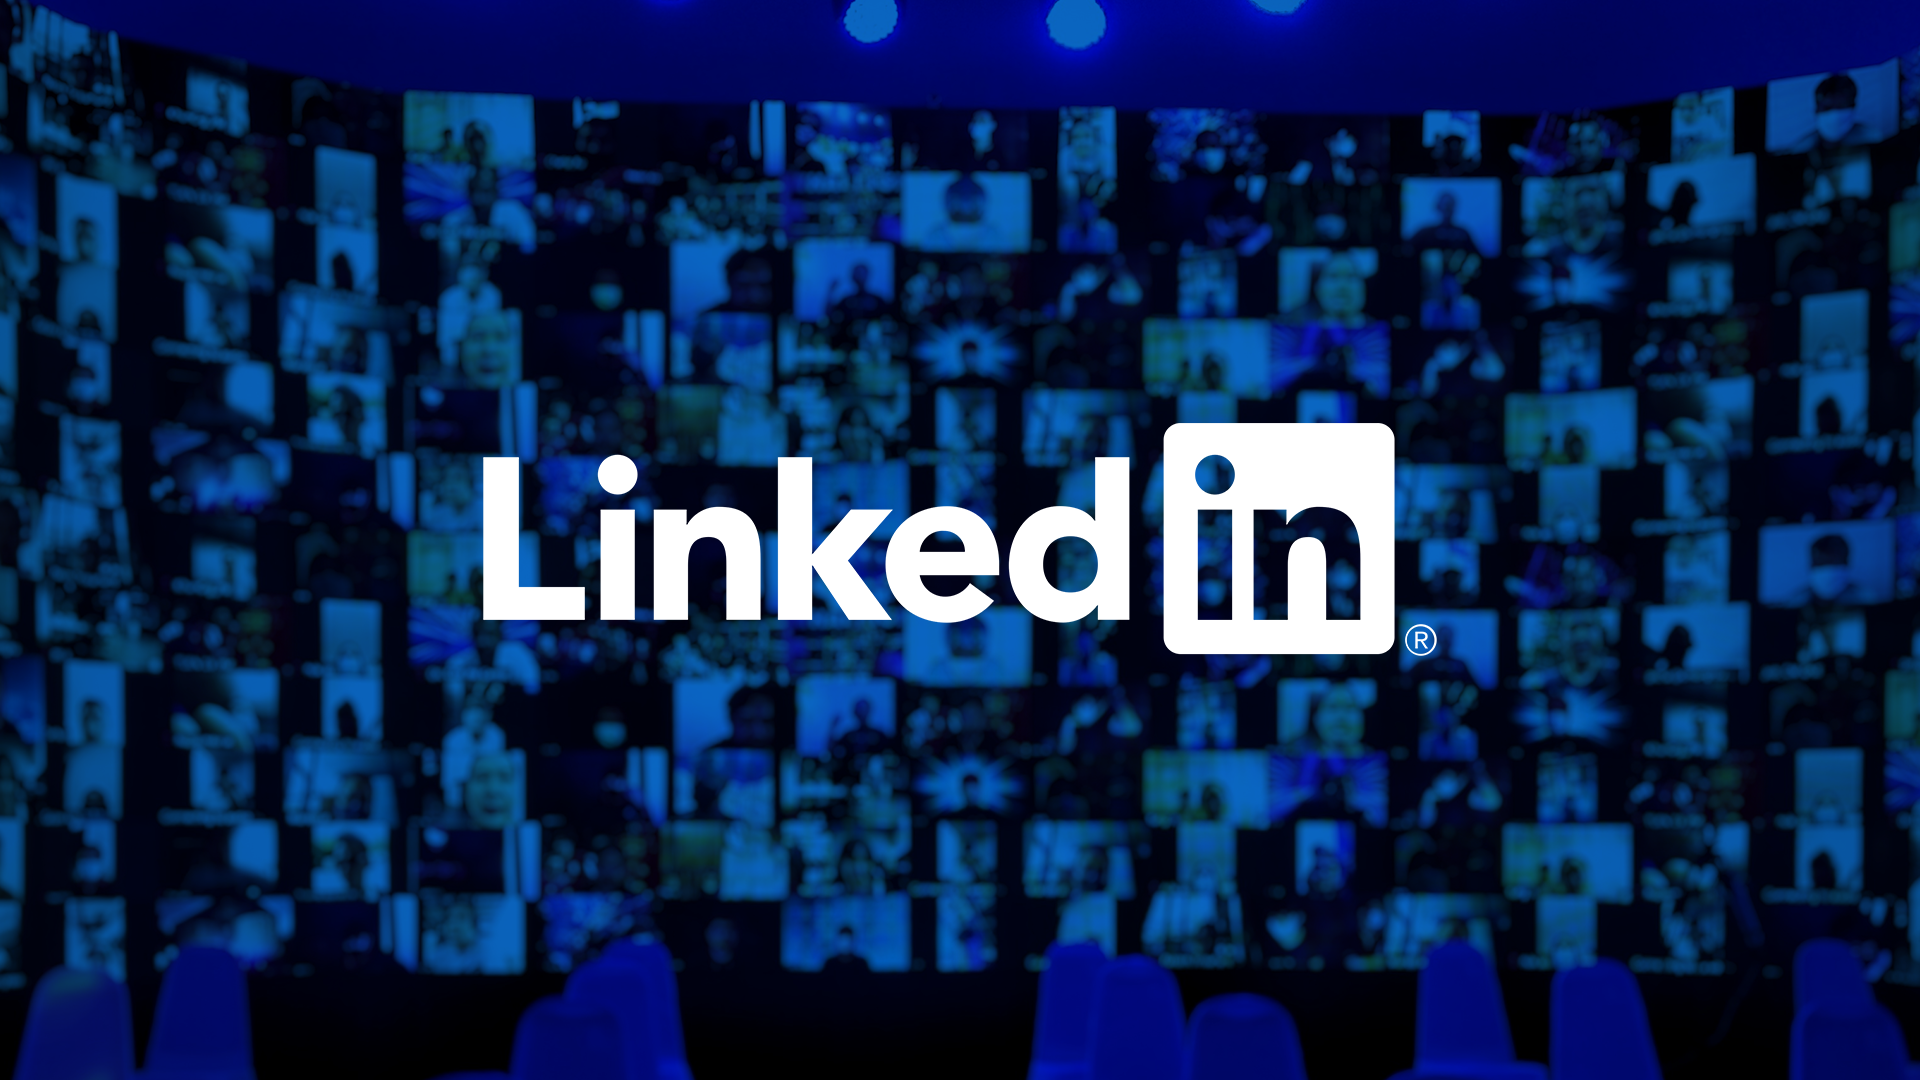 LinkedIn Beefing Its ‘Creator Mode’ up, Including LinkedIn Live Access and Newsletters